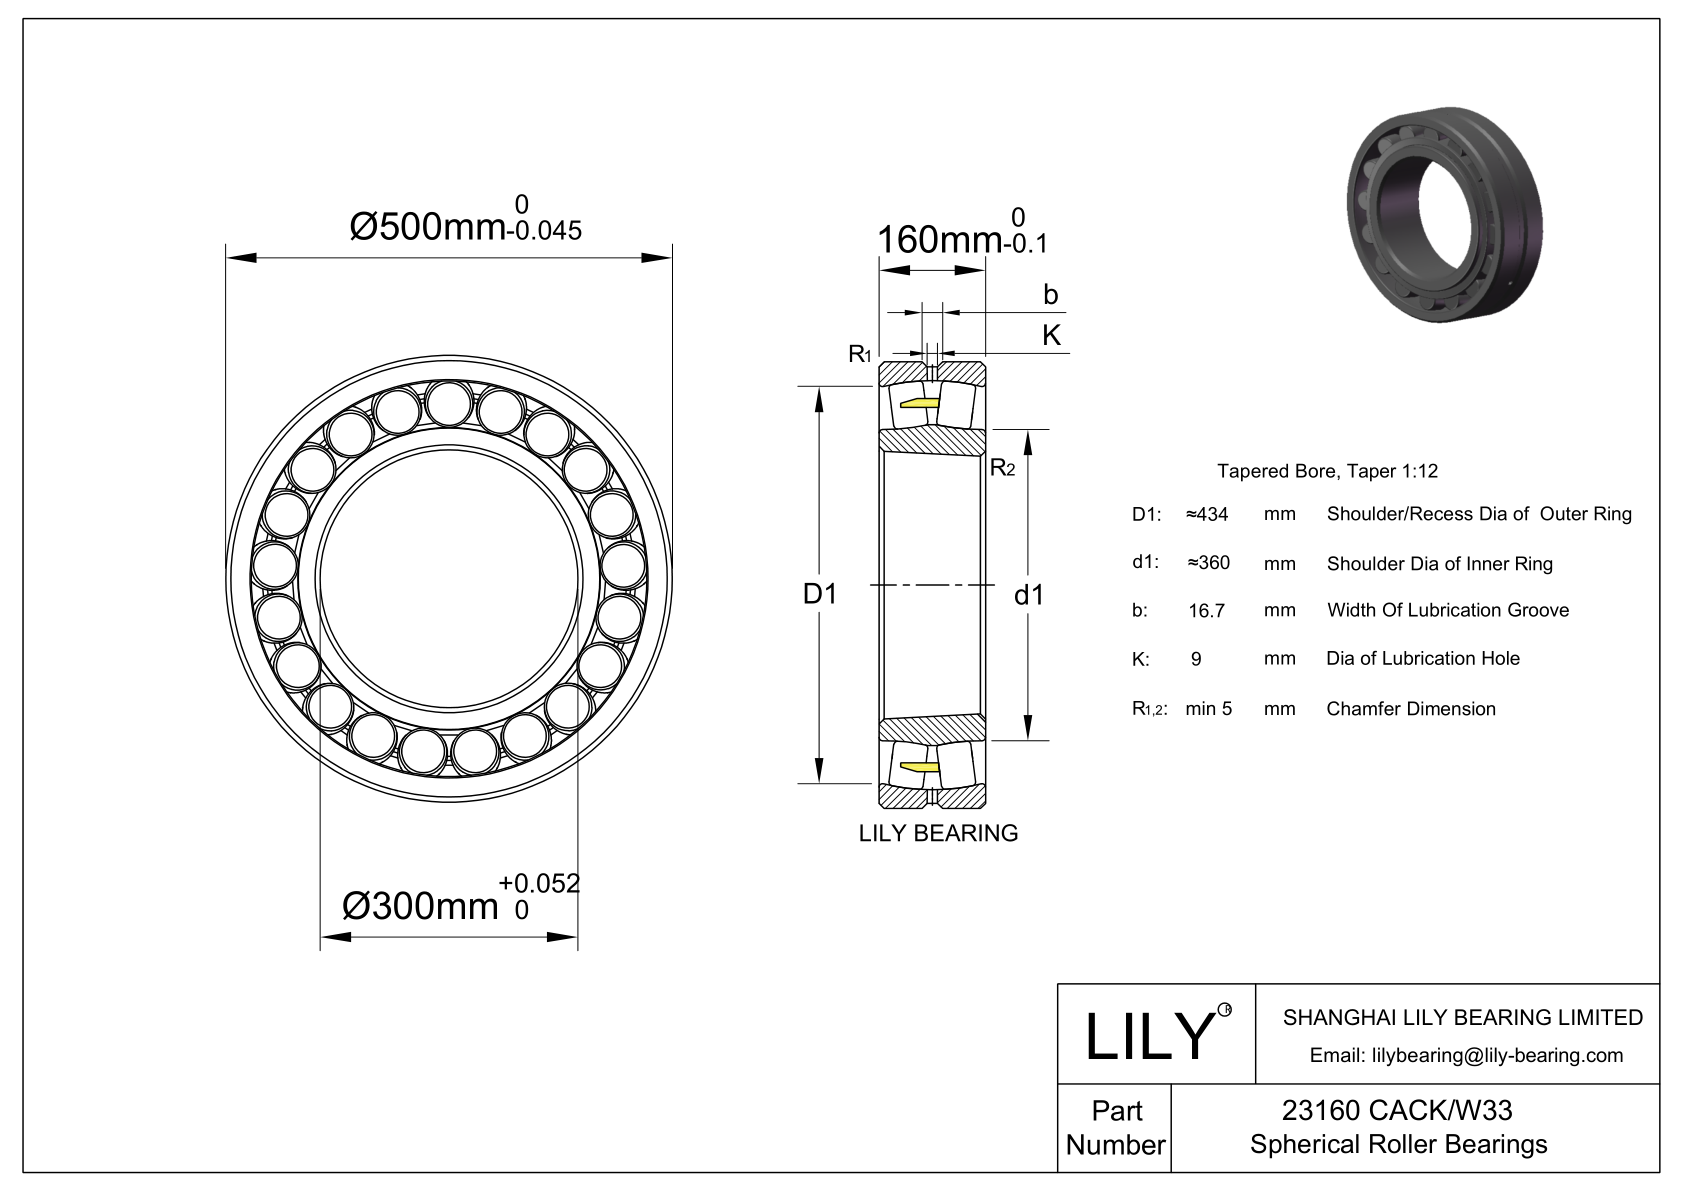 23160 CACK/W33 Double Row Spherical Roller Bearing cad drawing